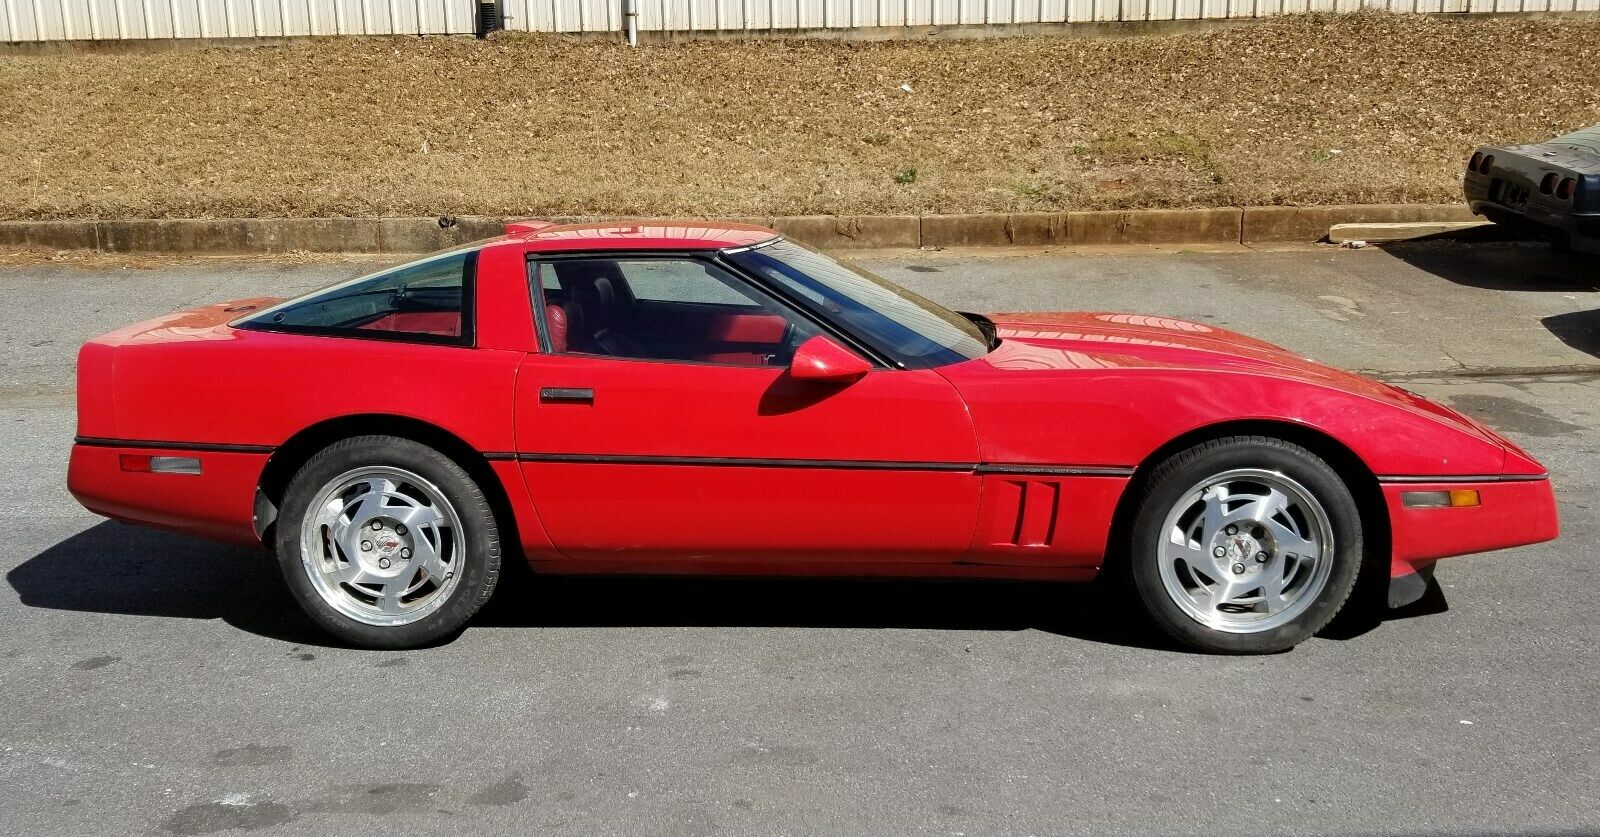 Exterior passenger-side view of a 1984 Chevrolet Corvette, an example of a fourth-generation Corvette.